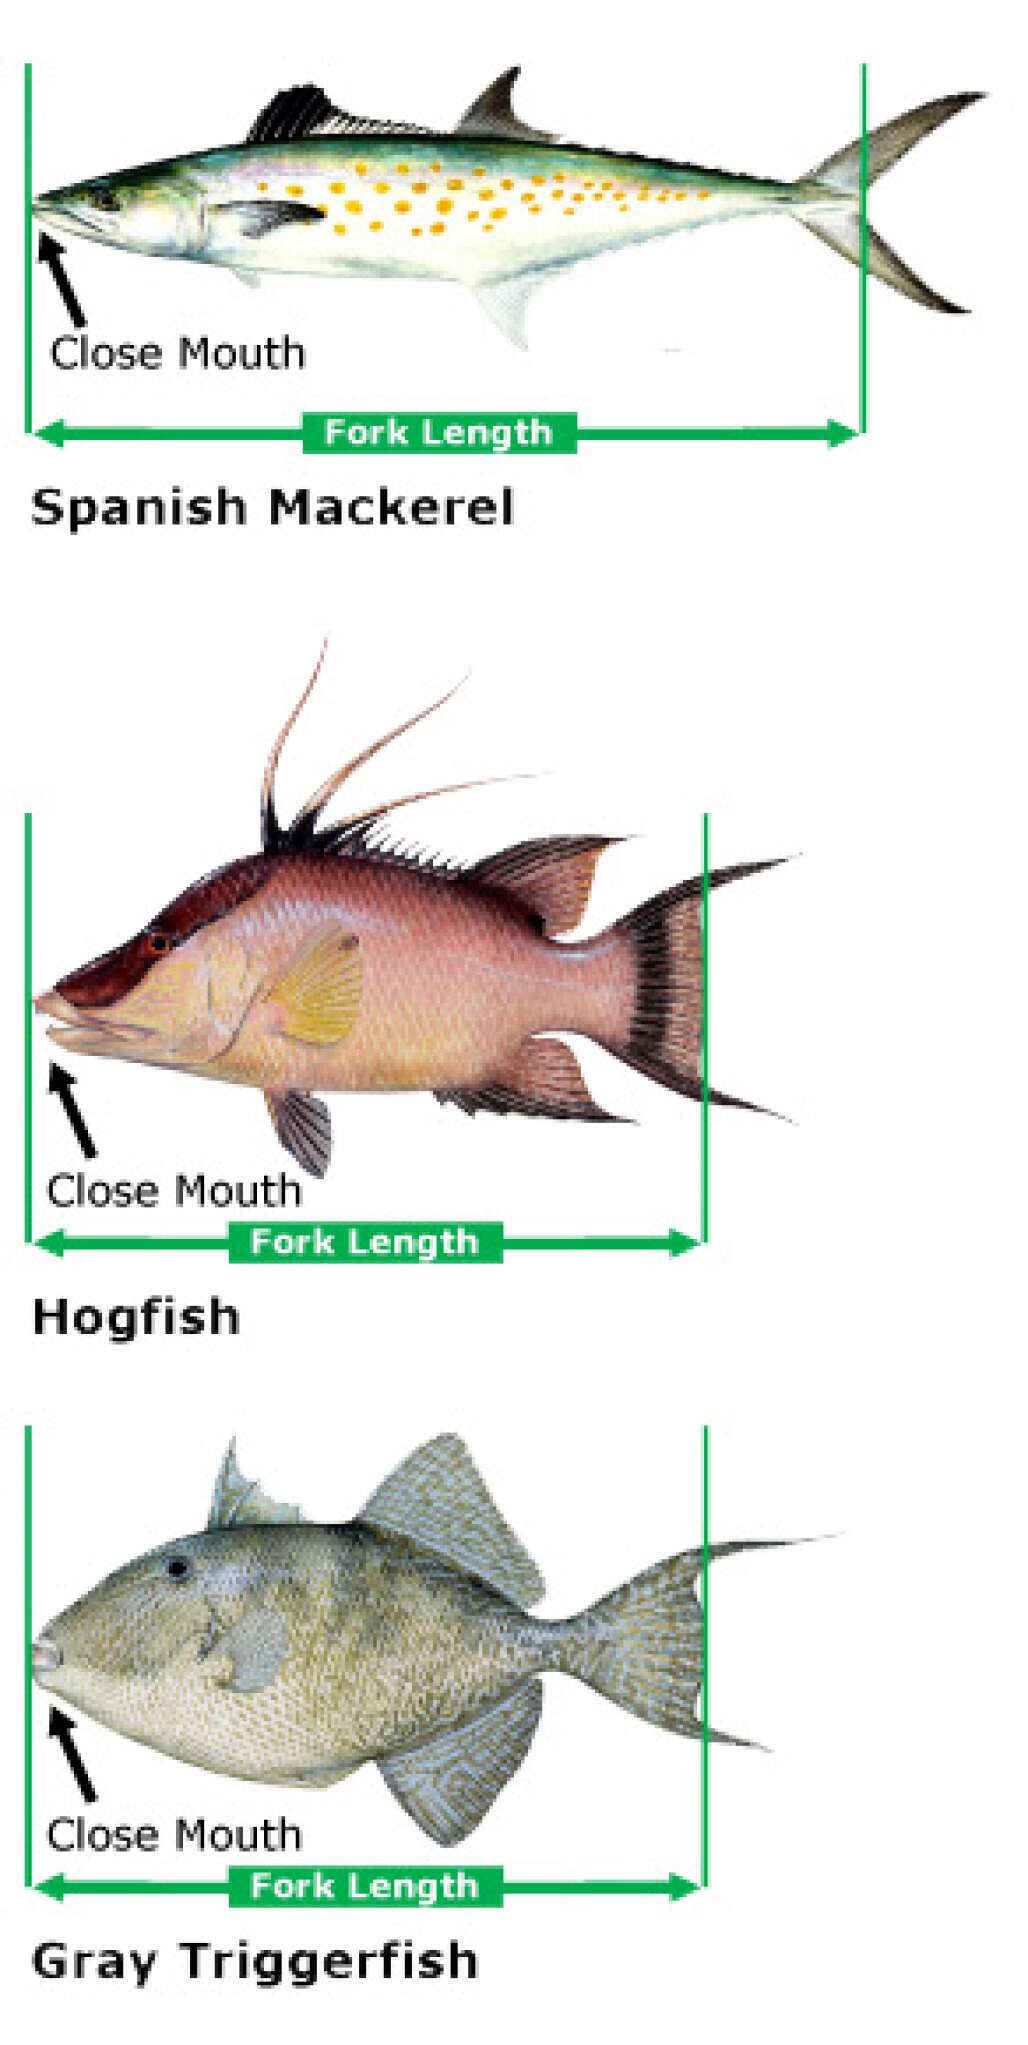 How To Measure Fish Forms by Matt Thompson